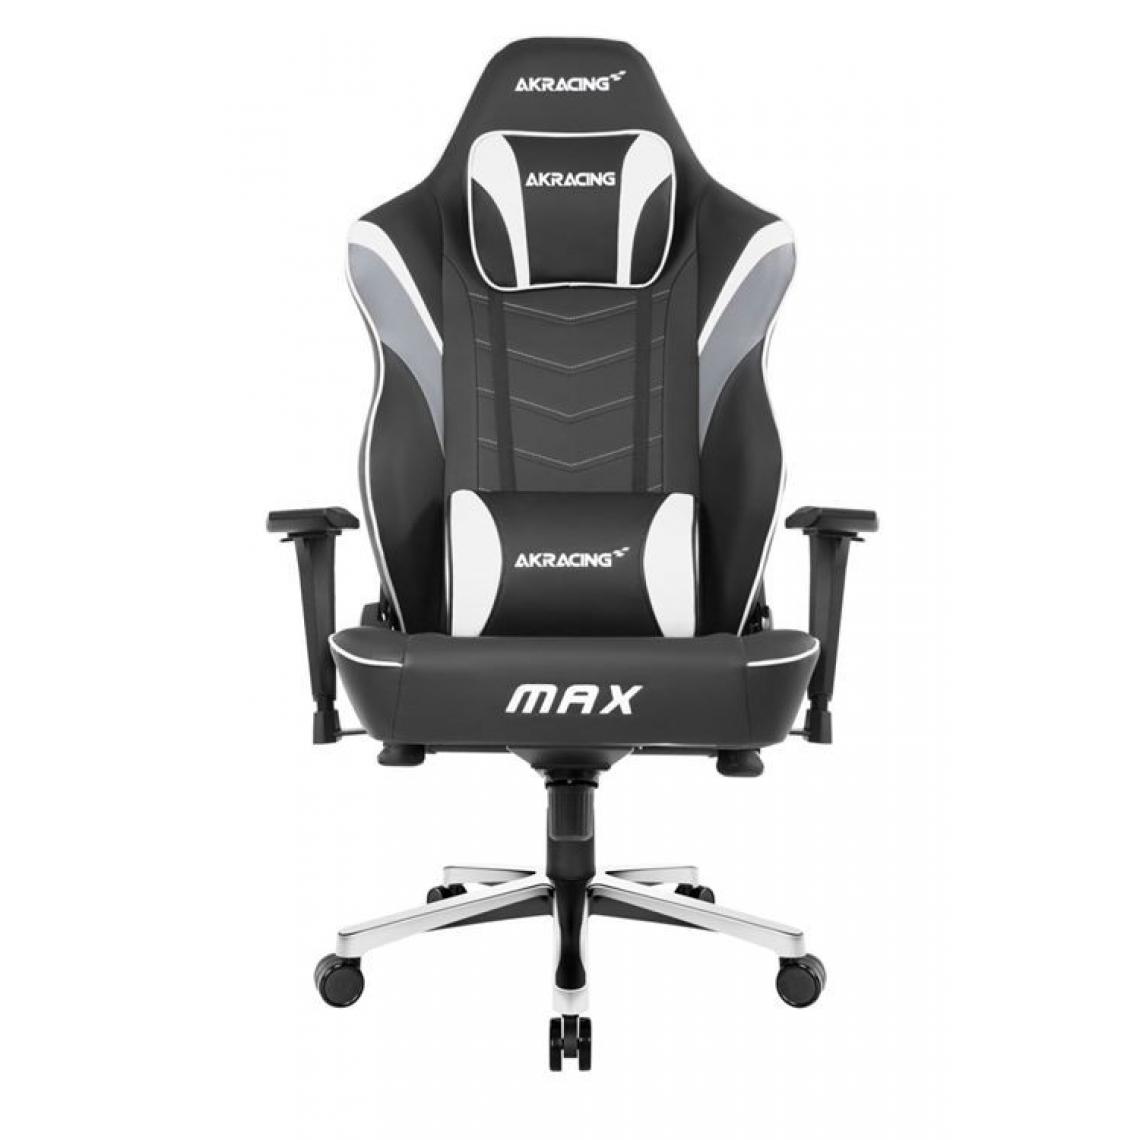 Akracing - Chaise Gaming AkRacing Série Masters Max Noir et blanc - Chaise gamer